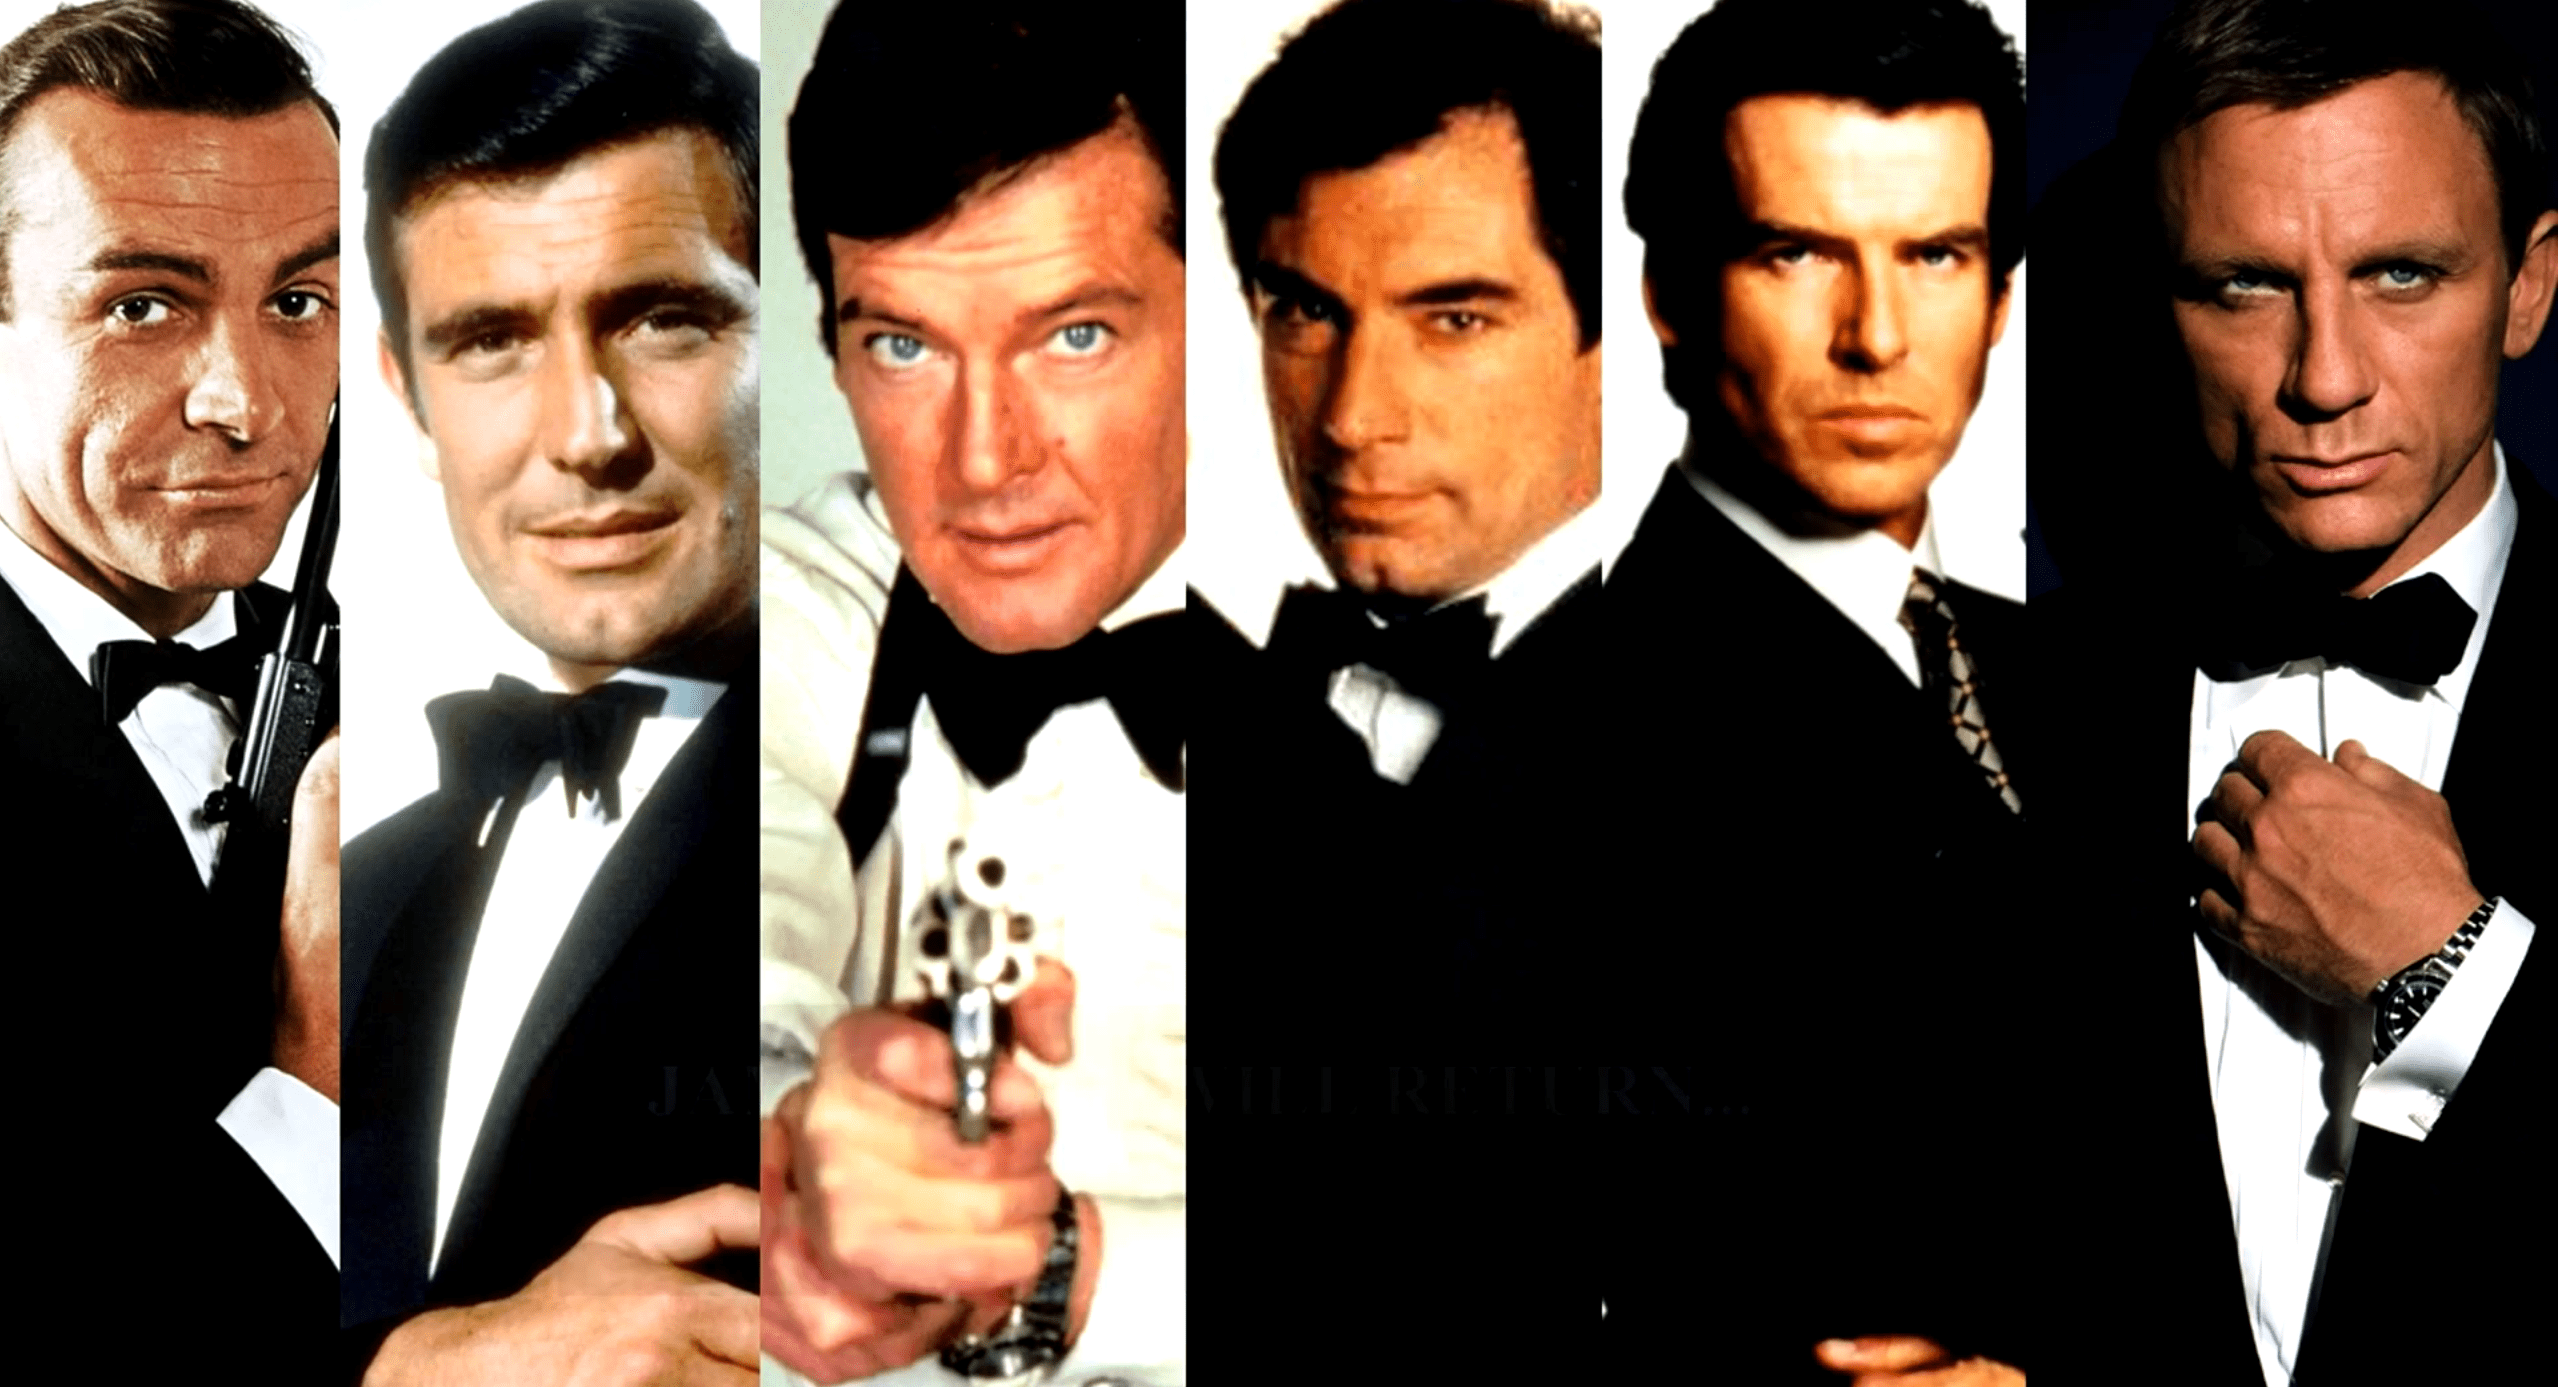 60 unknown facts about James Bond! (List) Useless Daily Facts